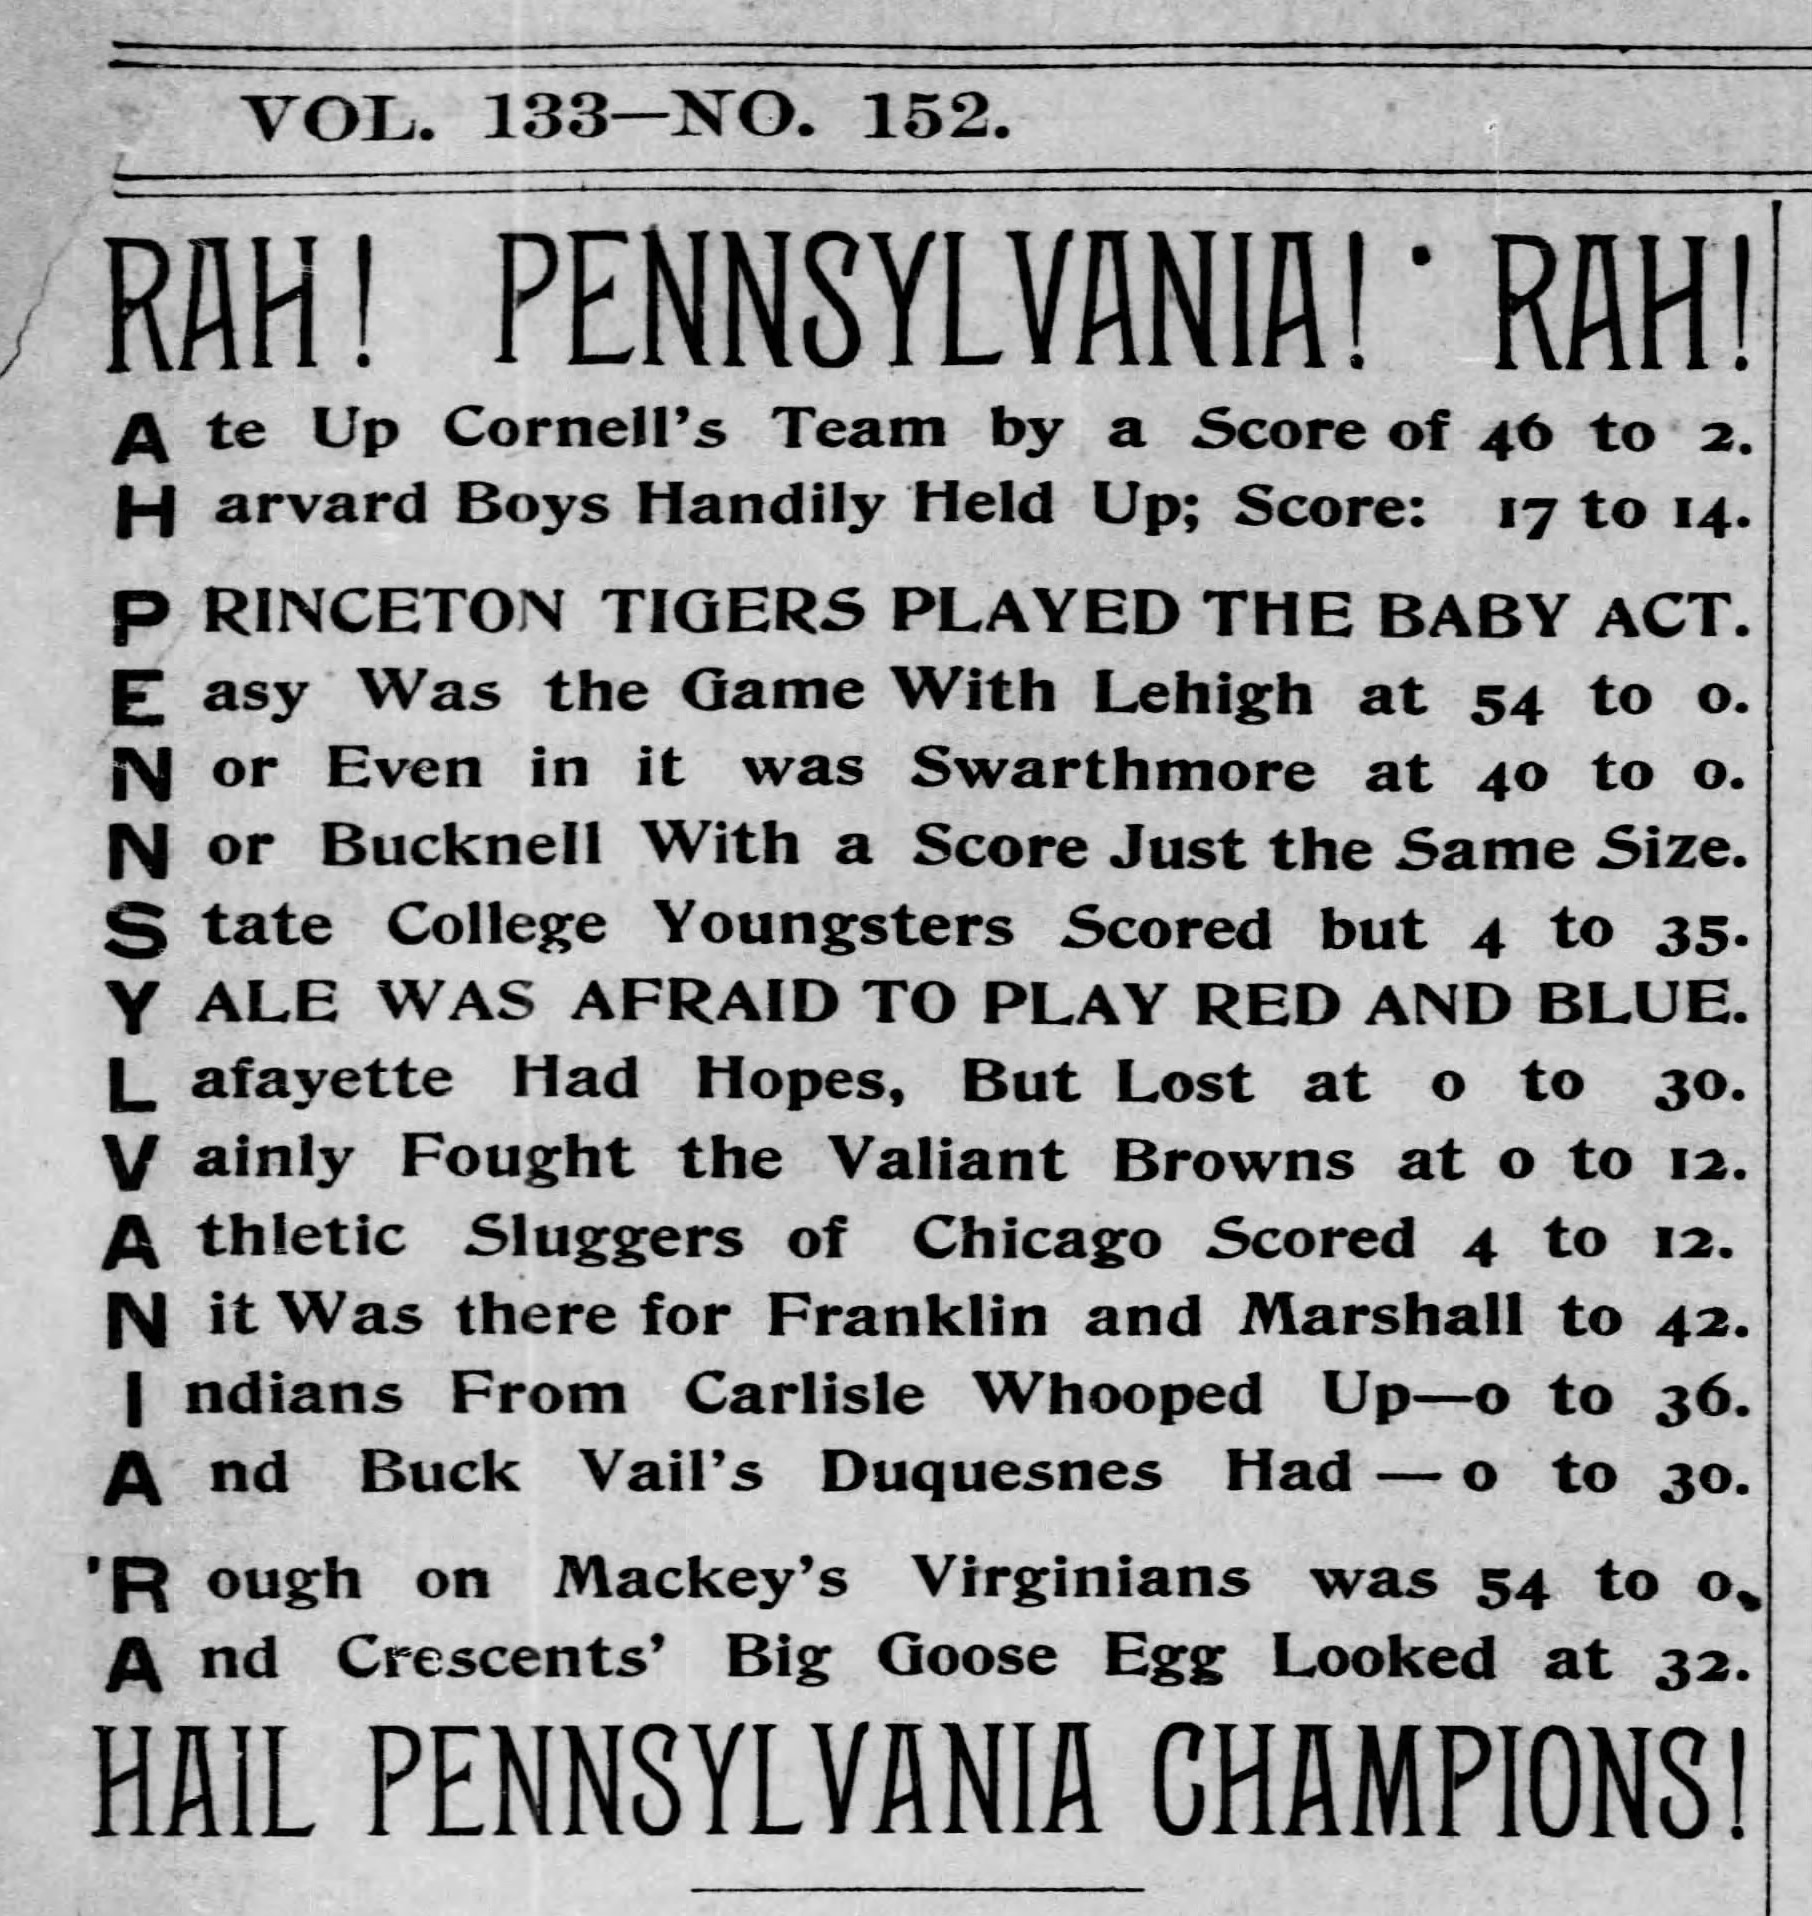 A write-up in the Nov. 29, 1895, edition of the Philadelphia Inquirer about Penn’s win in the inaugural Thanksgiving game contest against Cornell.